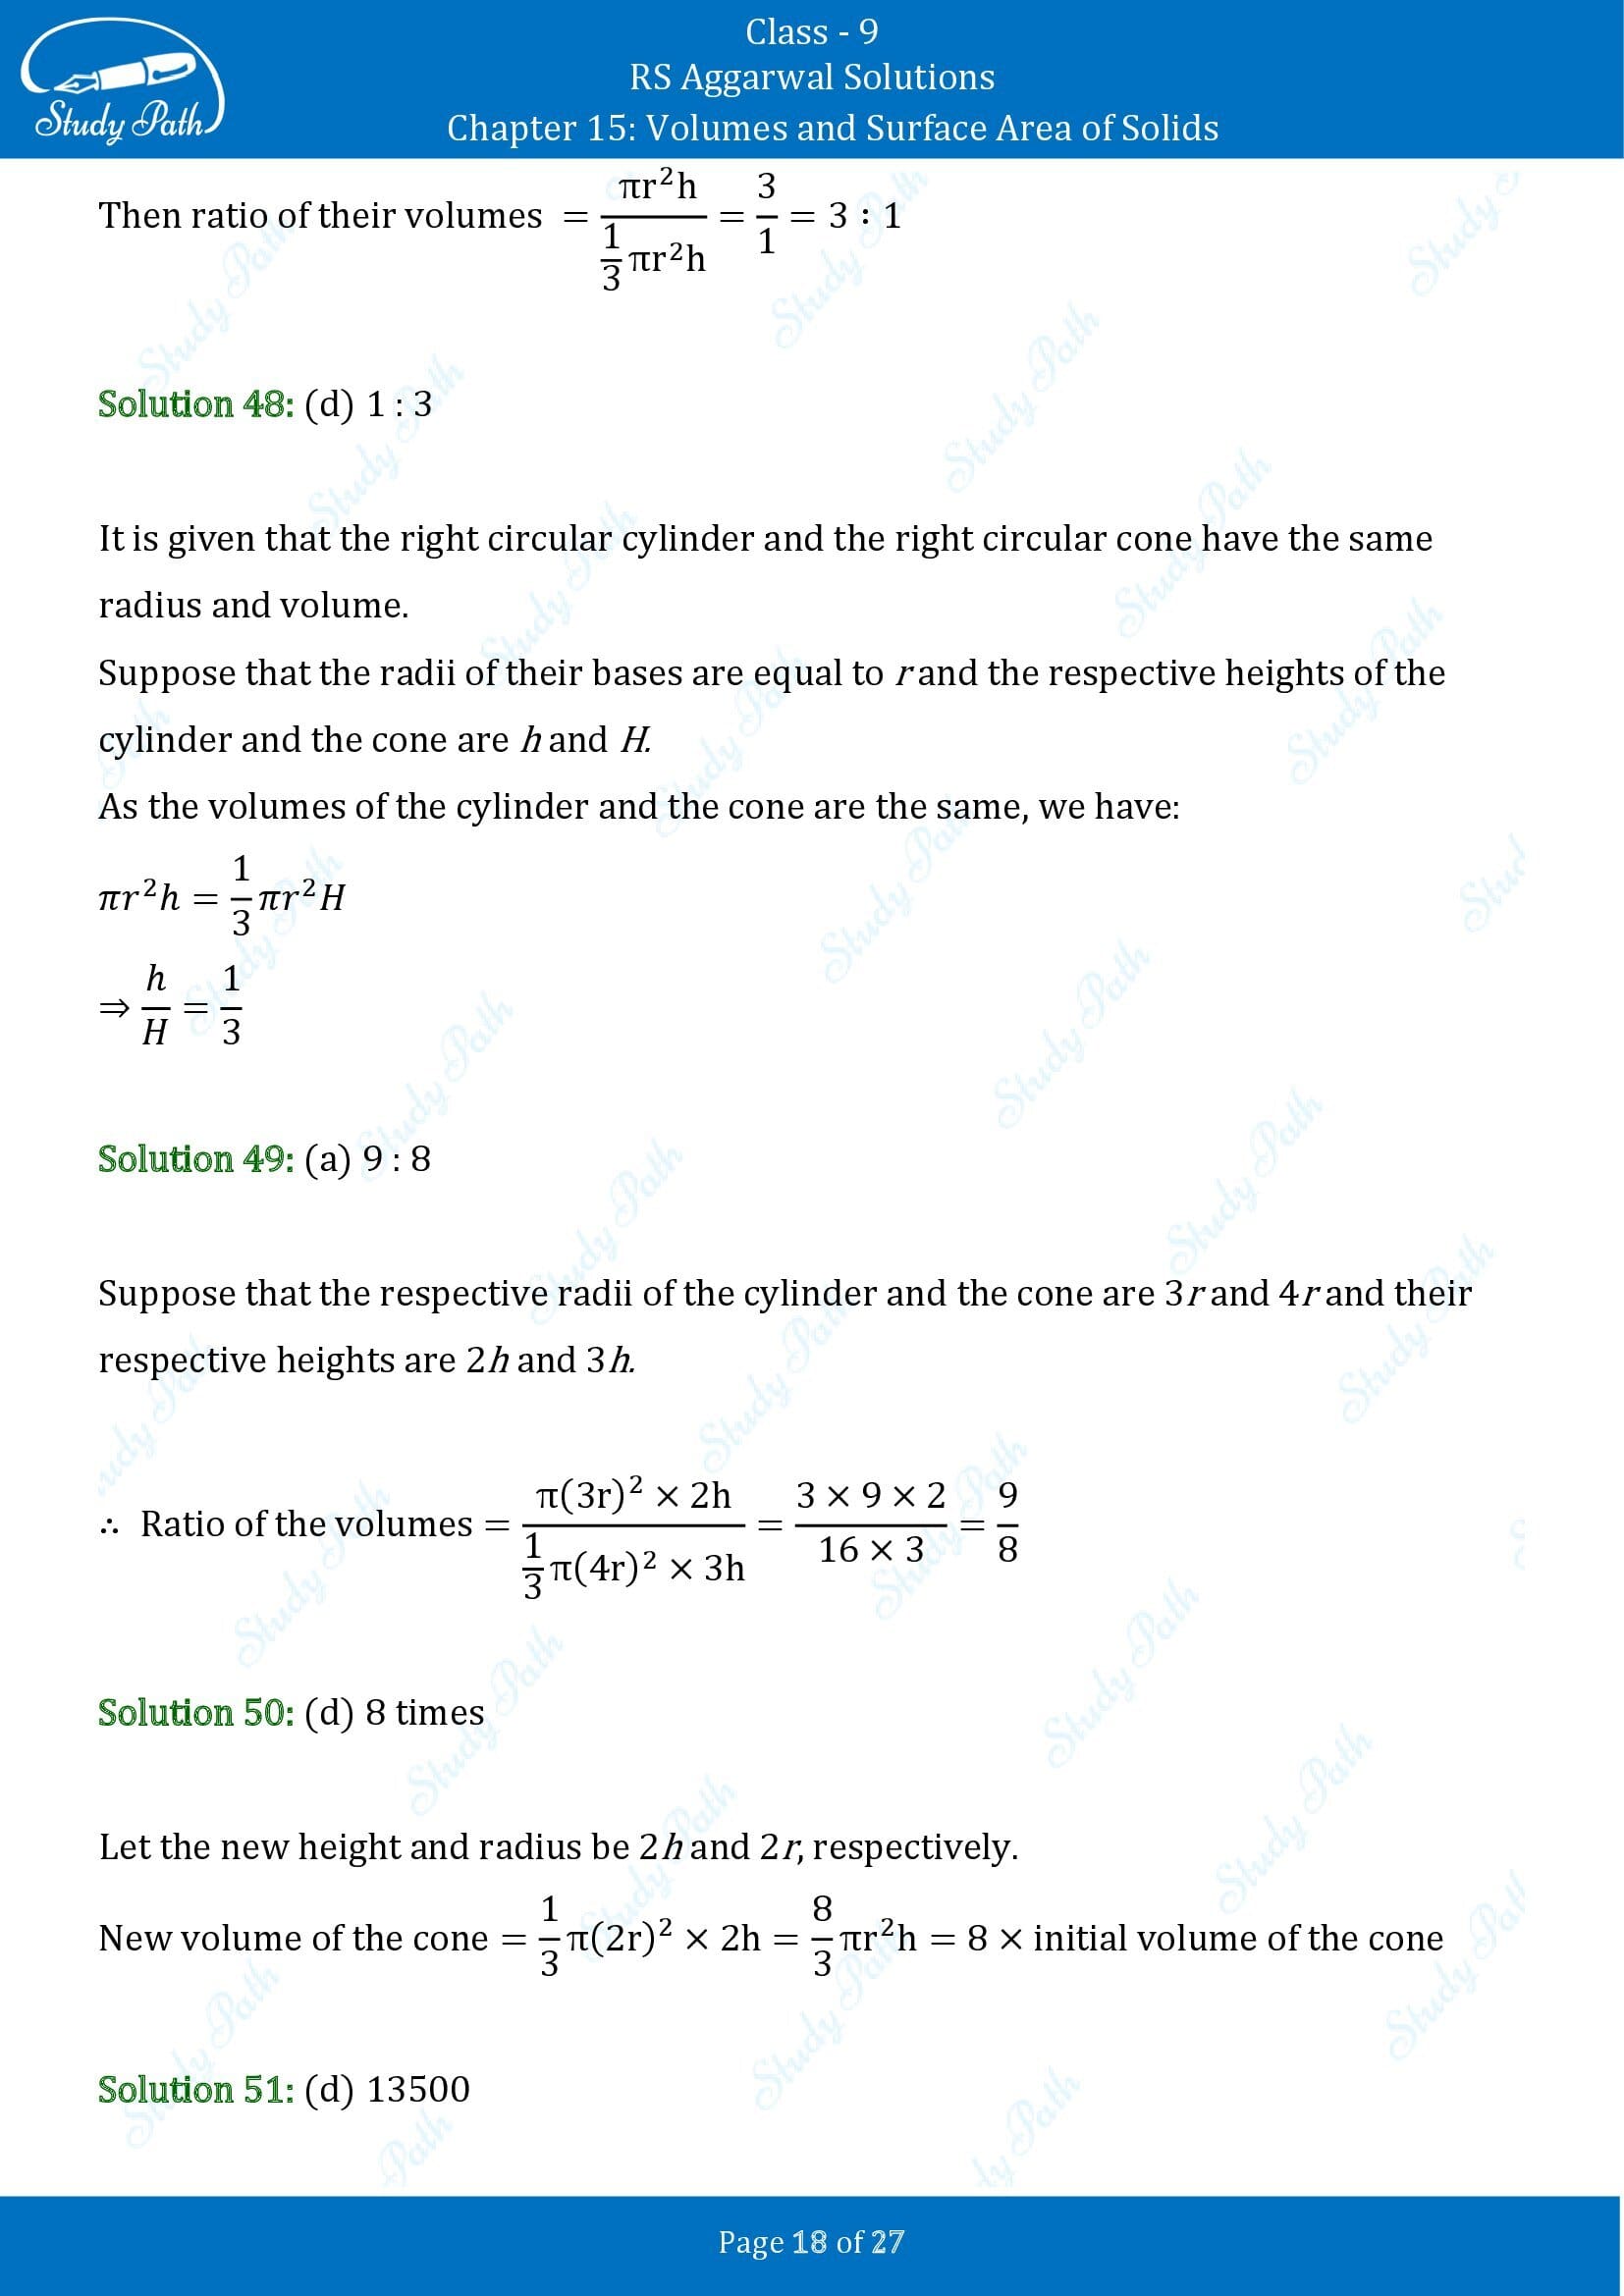 RS Aggarwal Solutions Class 9 Chapter 15 Volumes and Surface Area of Solids Multiple Choice Questions MCQs 00018